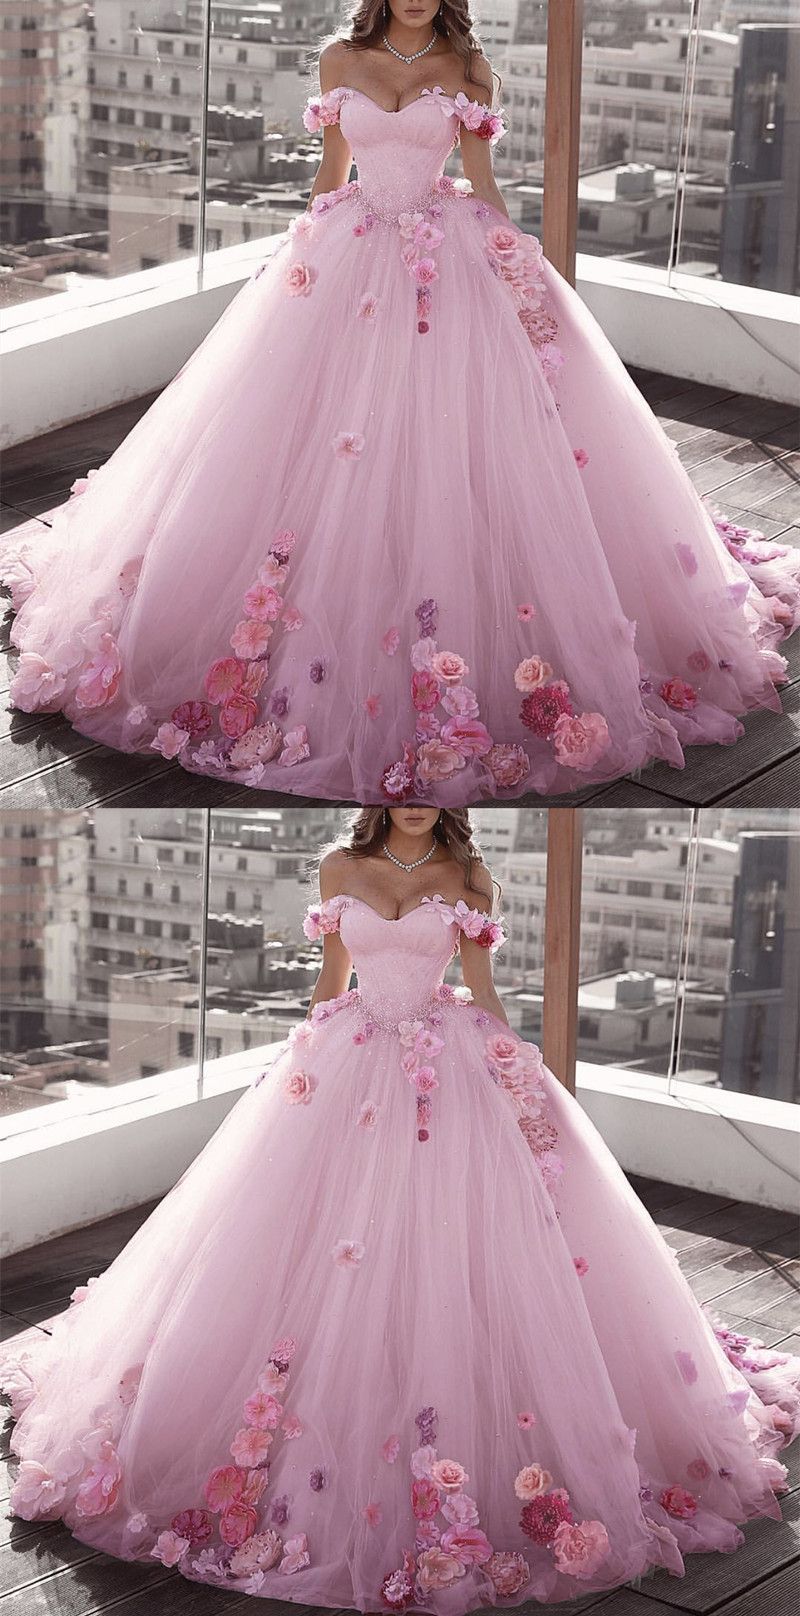 Off Shoulder Tulle Ball Gown Wedding Dresses Floral Flowers Beaded